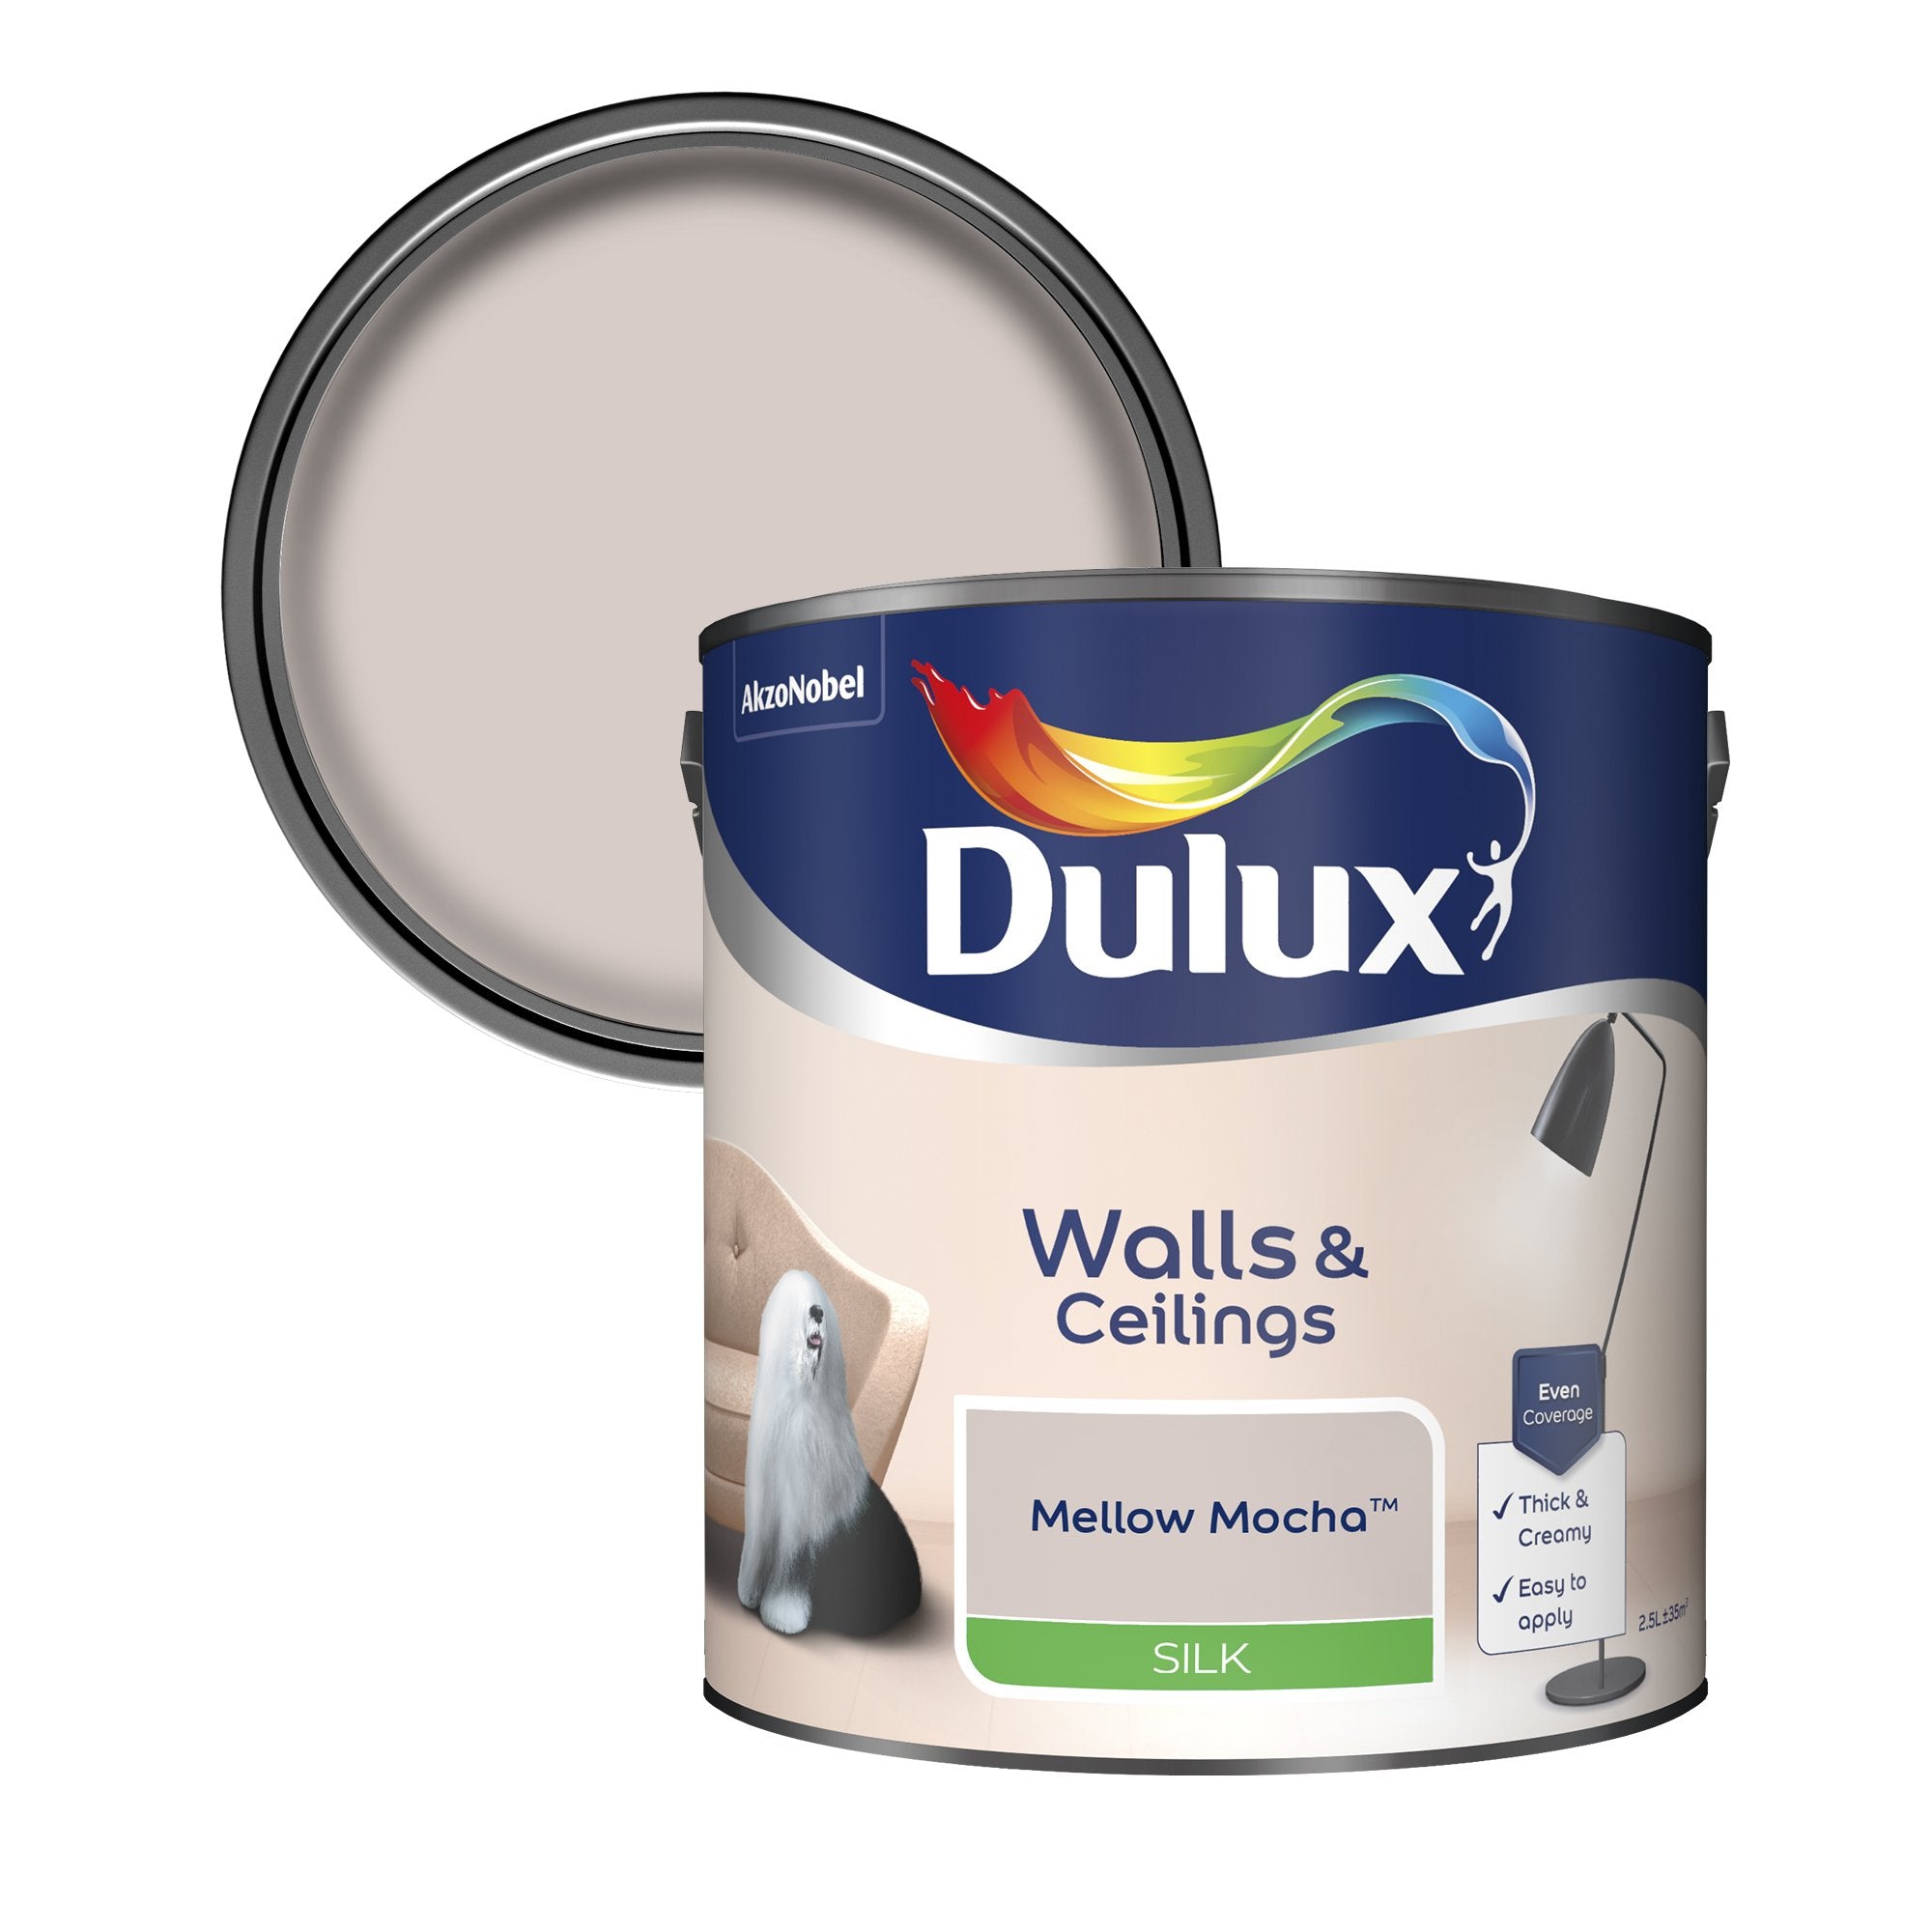 Dulux-Silk-Emulsion-Paint-For-Walls-And-Ceilings-Mellow-Mocha-2.5L